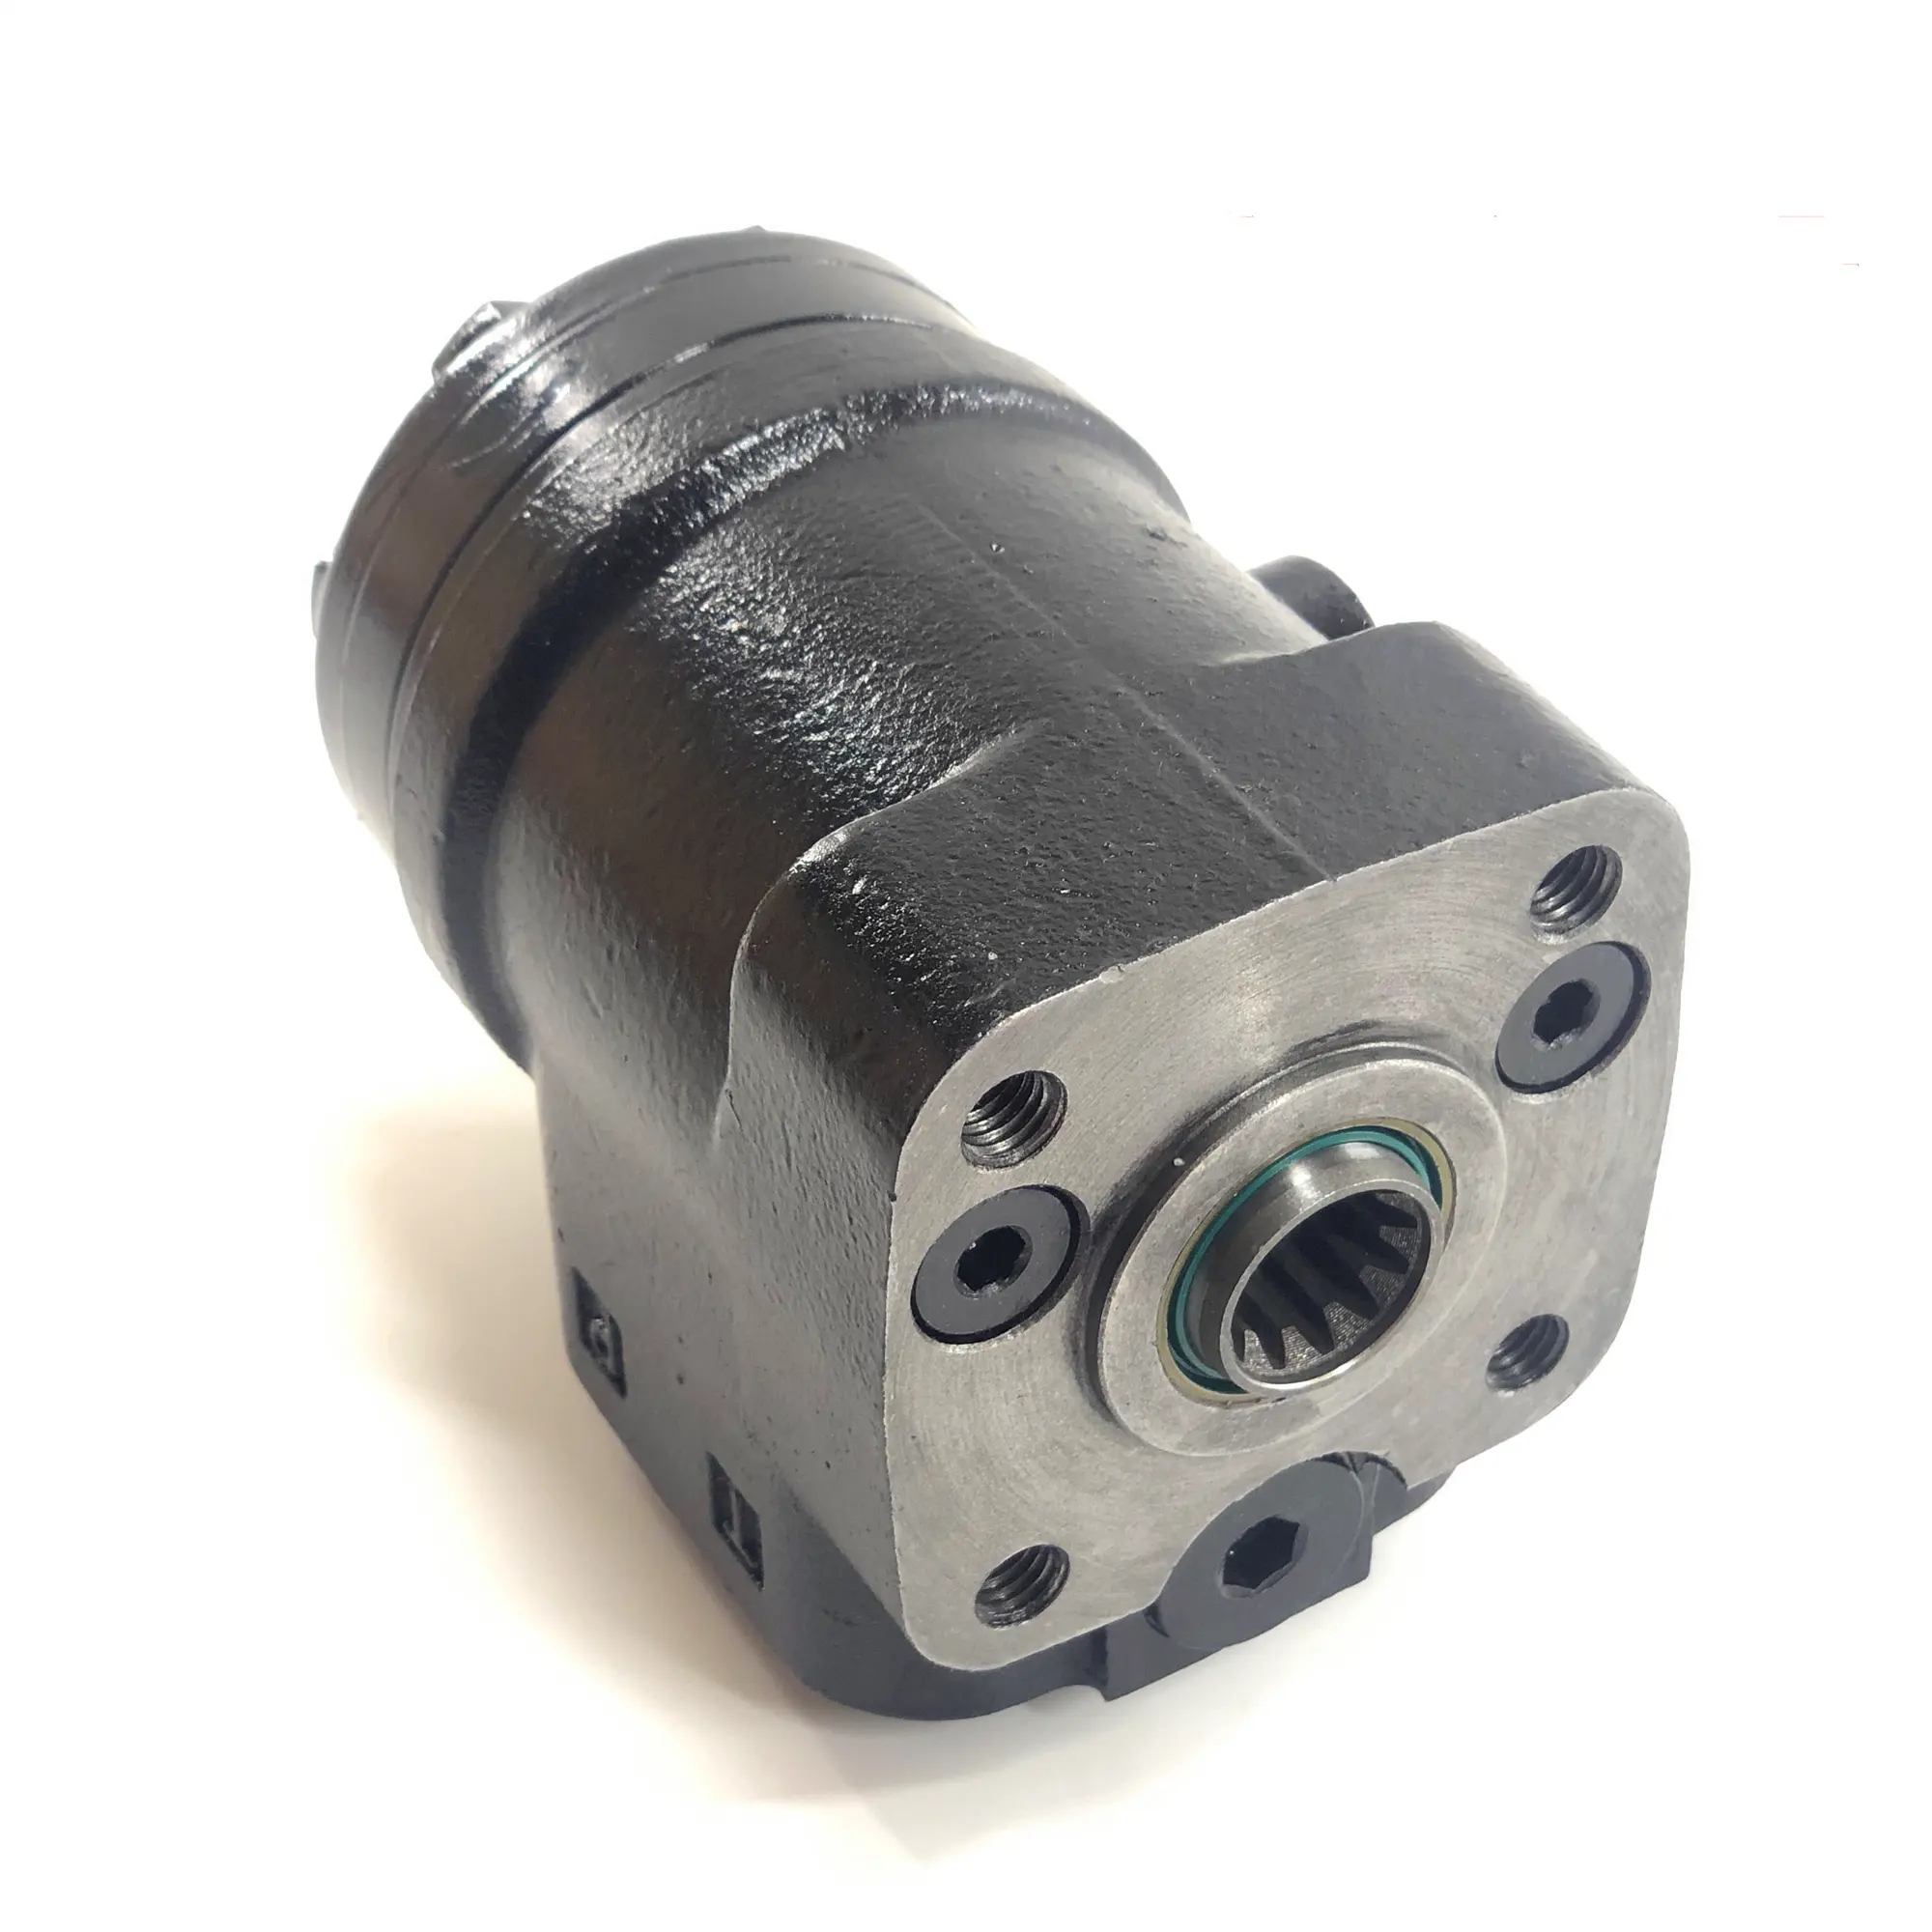 Agricultural machinery Hydraulic steering control unit 101S replace OSPB/OSPC ON orbitrol steering SUPPLIER